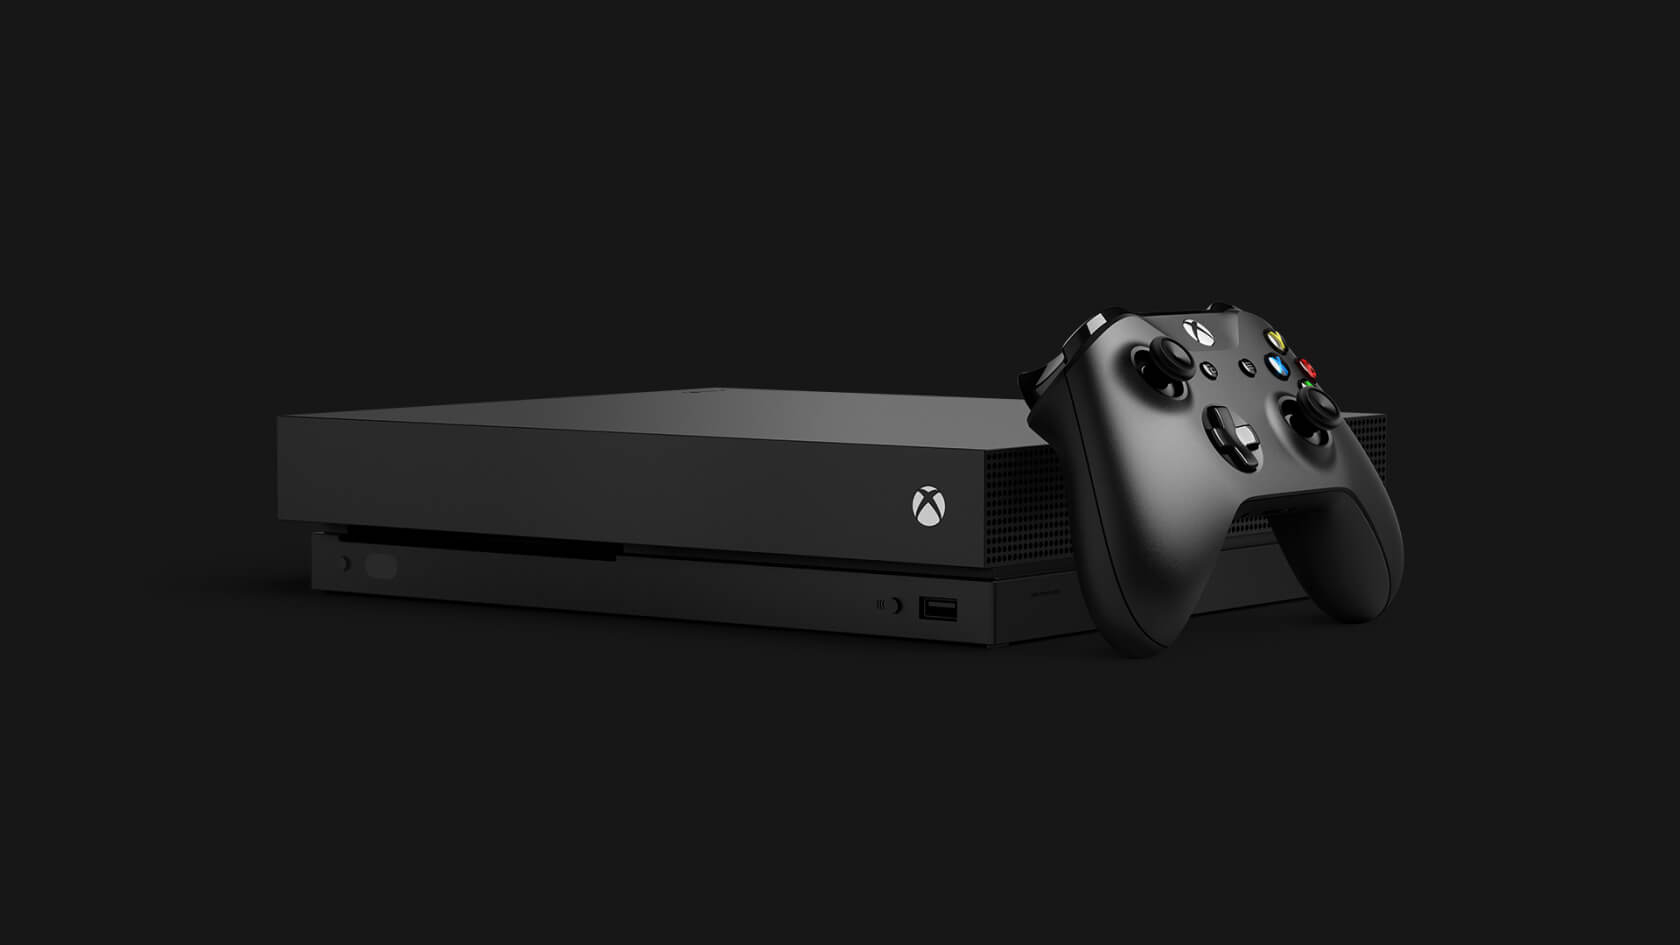 Only 1639 Xbox One X units were sold in Japan during launch week